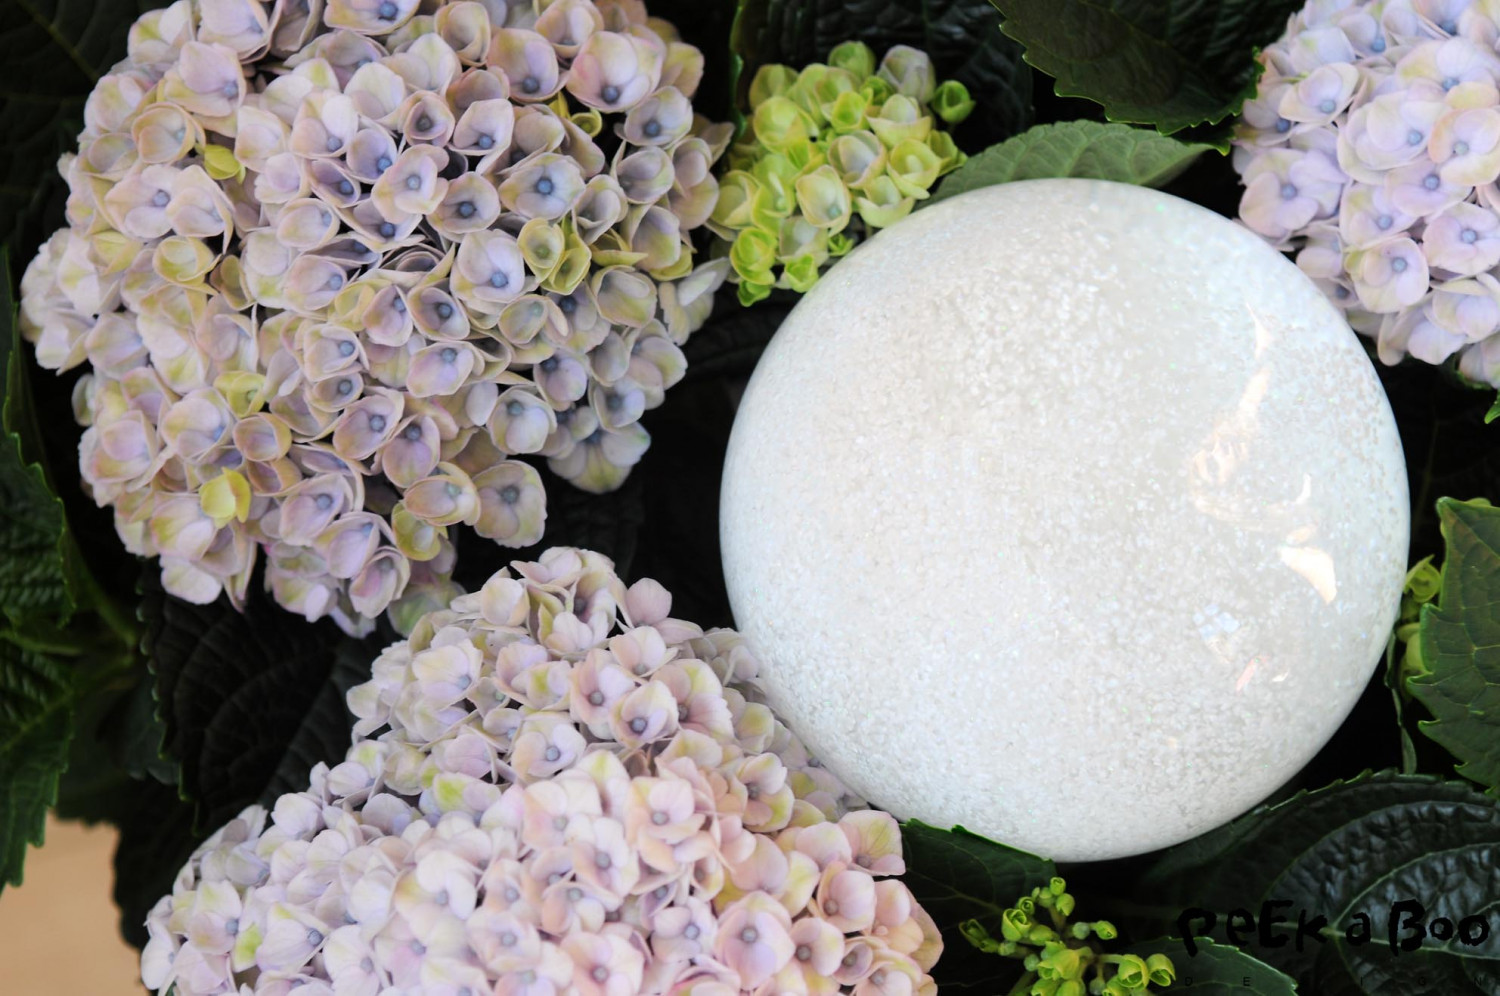 I couldn't help trying to implement the snowglobe to the blooming Hydrangea..Just because they both are so pretty. The Hydrangea is from the danish grower Møllerhøj and are the Magical Hortensien that blooms for at least 150 days.